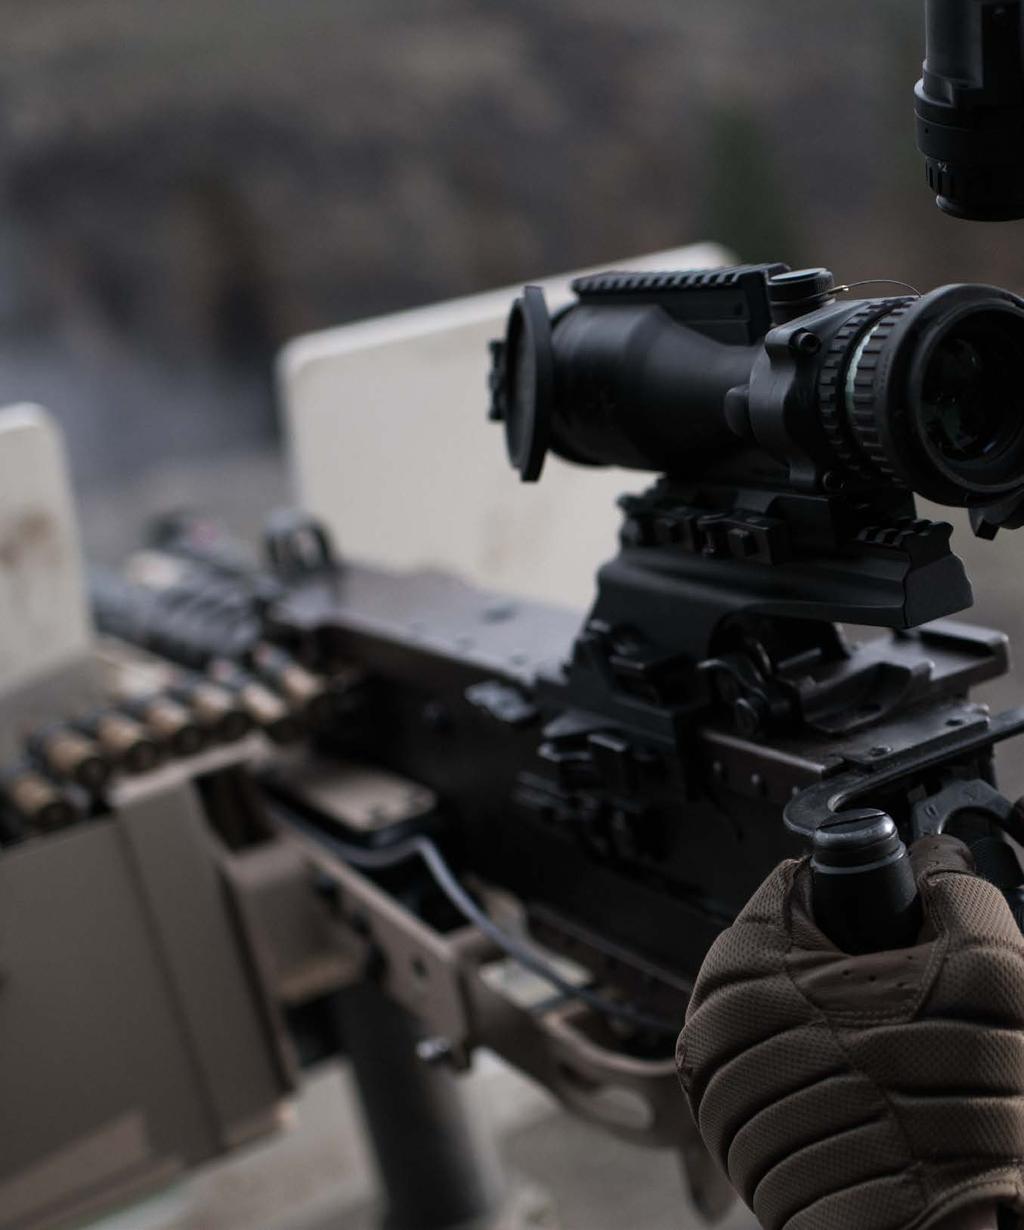 WEAPON MOUNTING SYSTEMS Since 1984, Military Systems Group has continually developed a wide variety of crew served weapon mounting solutions, supporting the needs of all branches of the US Armed